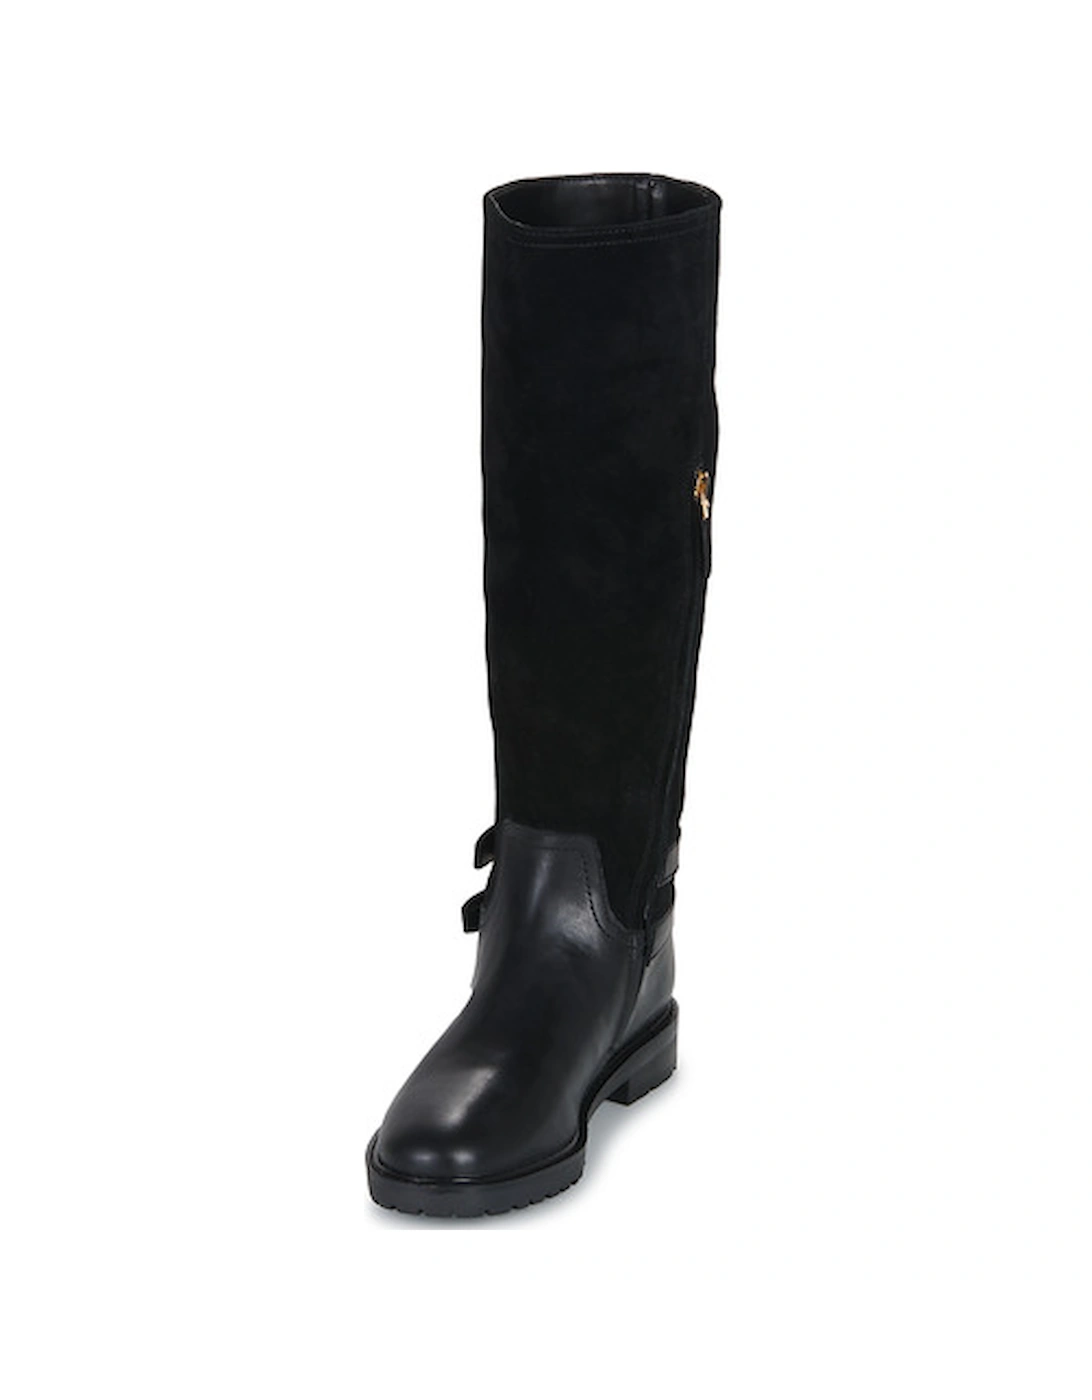 EMELIE-BOOTS-TALL BOOT